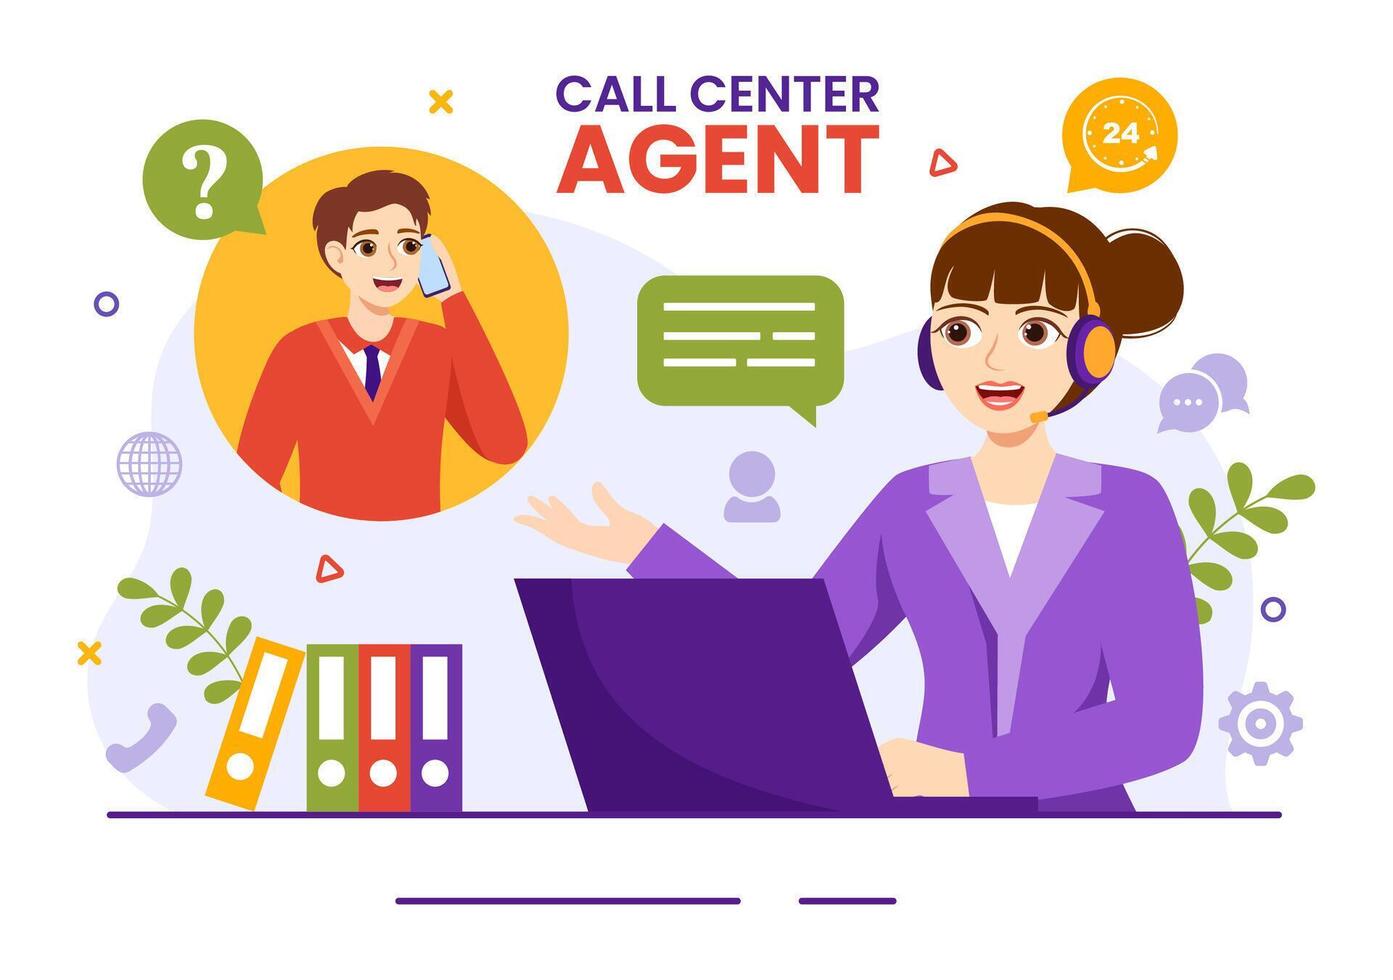 Call Center Agent Vector Illustration of Customer Service or Hotline Operator with Headsets and Computers in Flat Cartoon Background